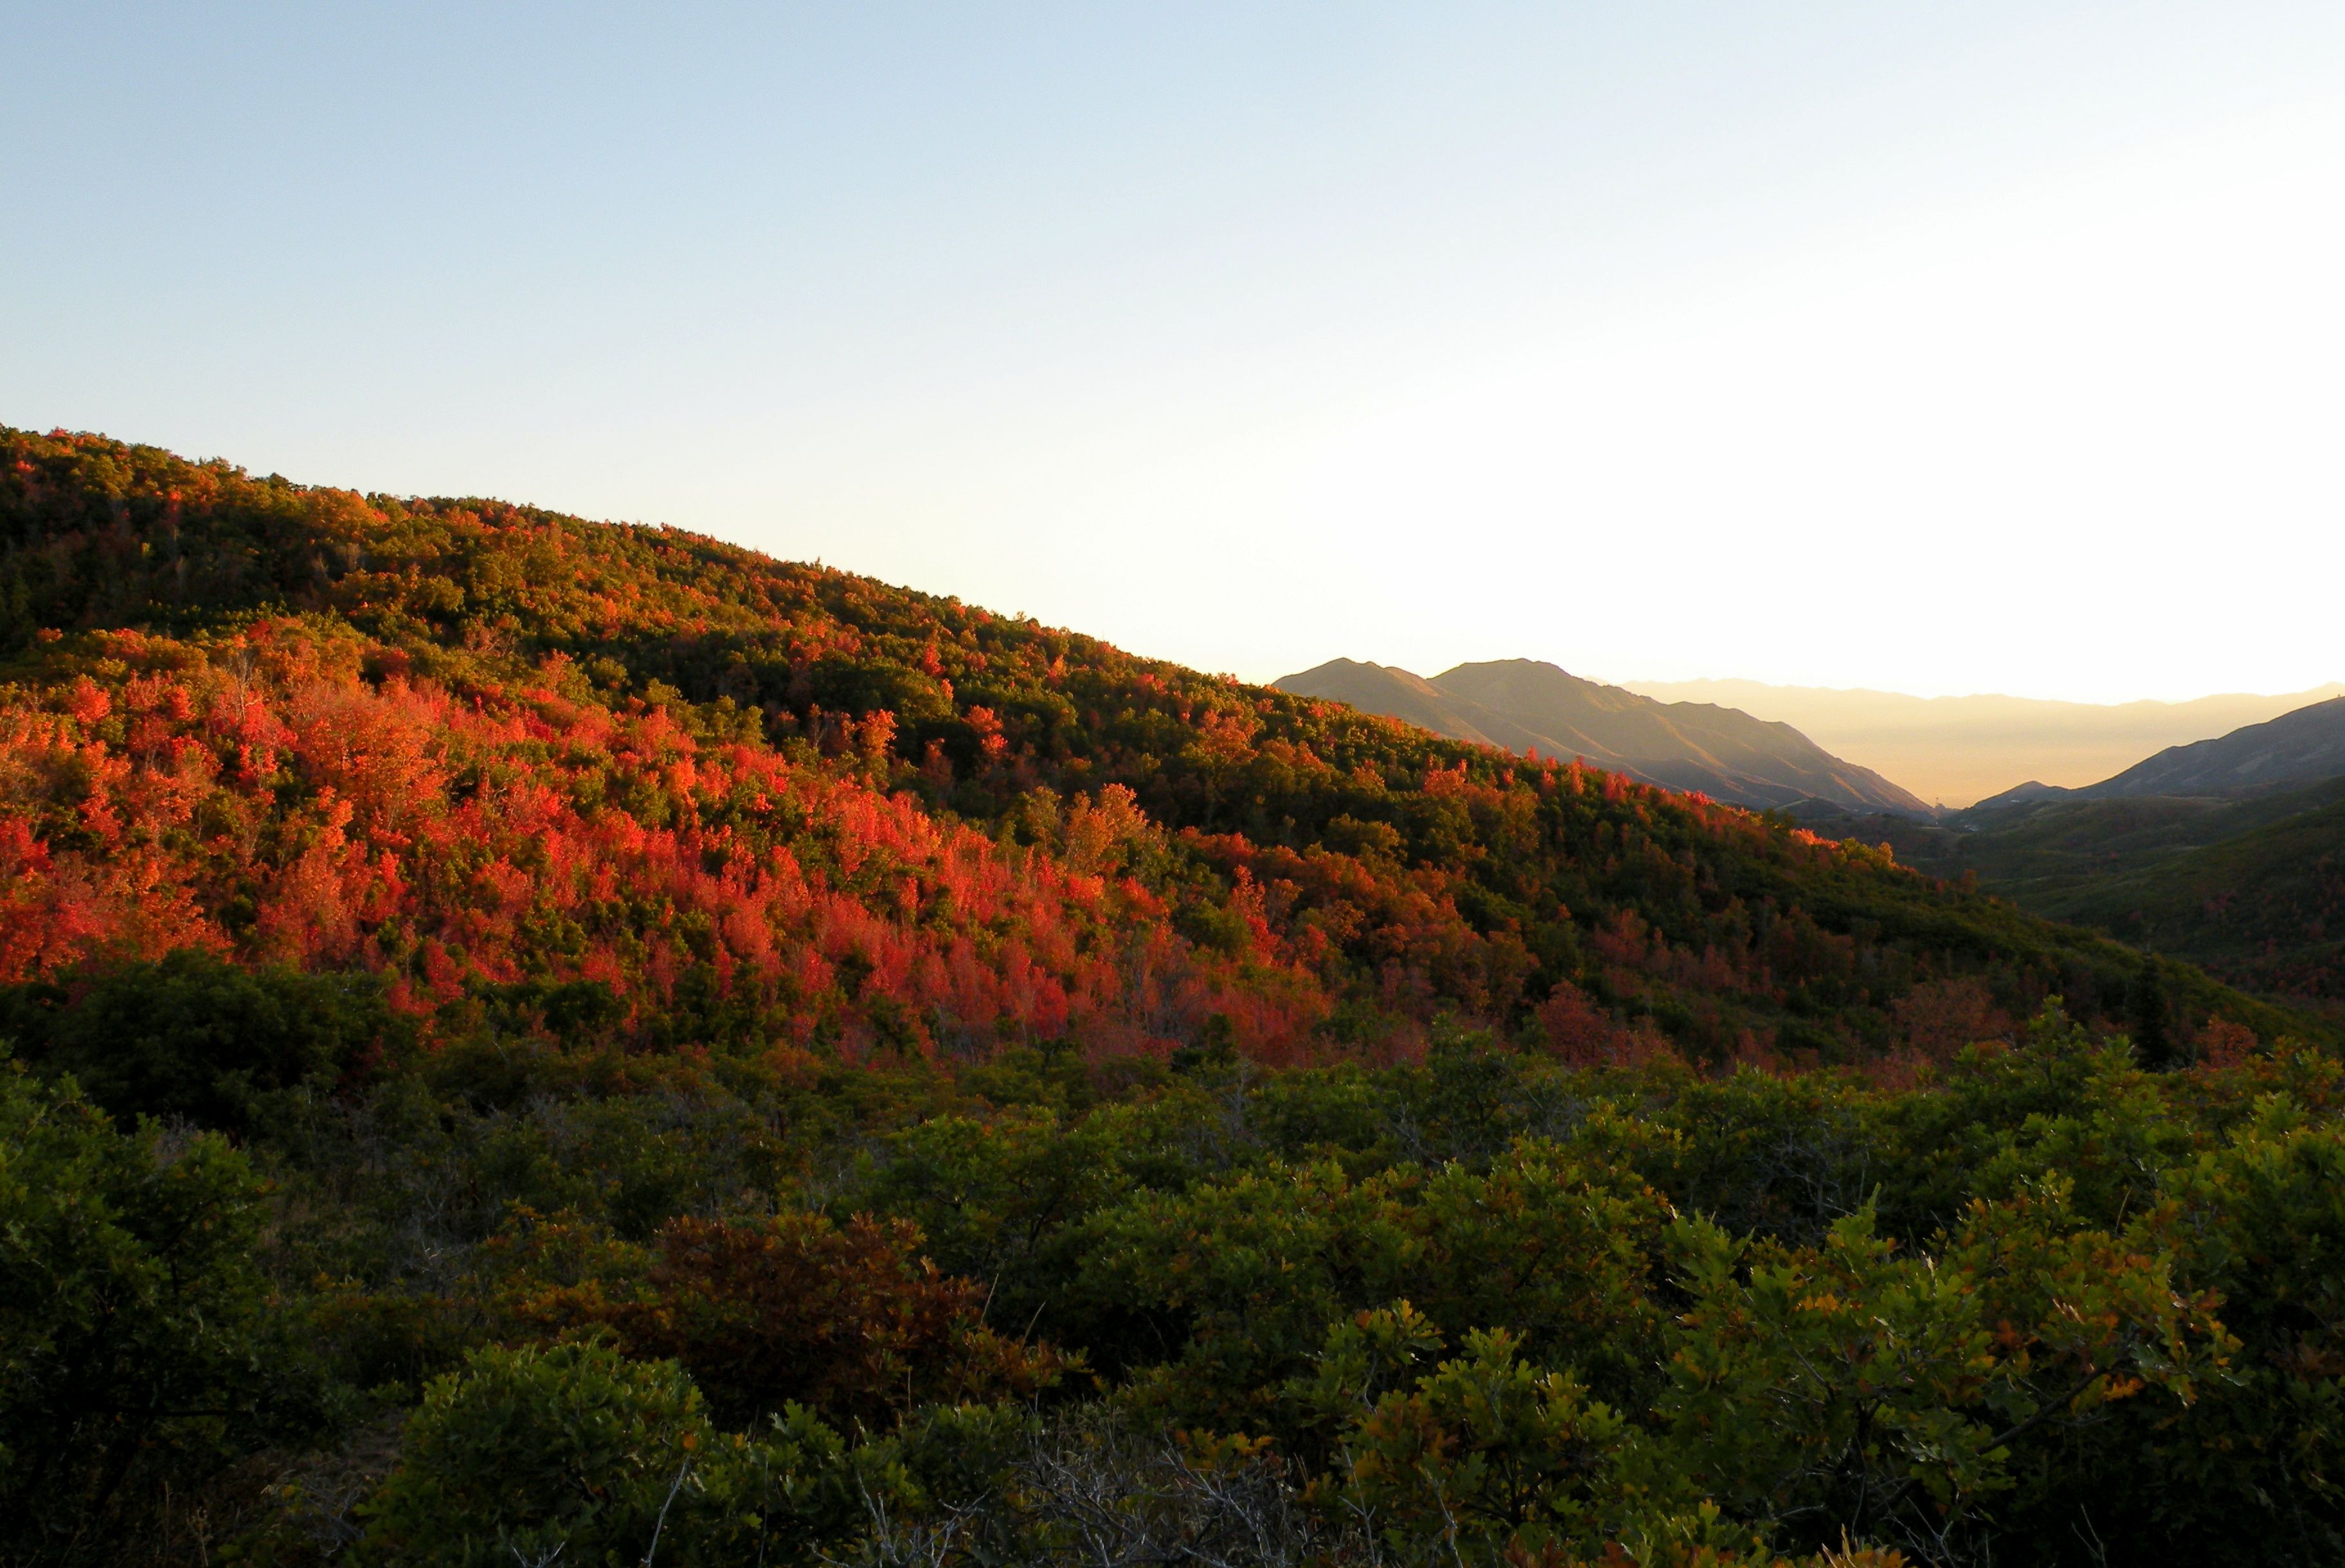 Fall leaves glow in the evening sun on a mountain.